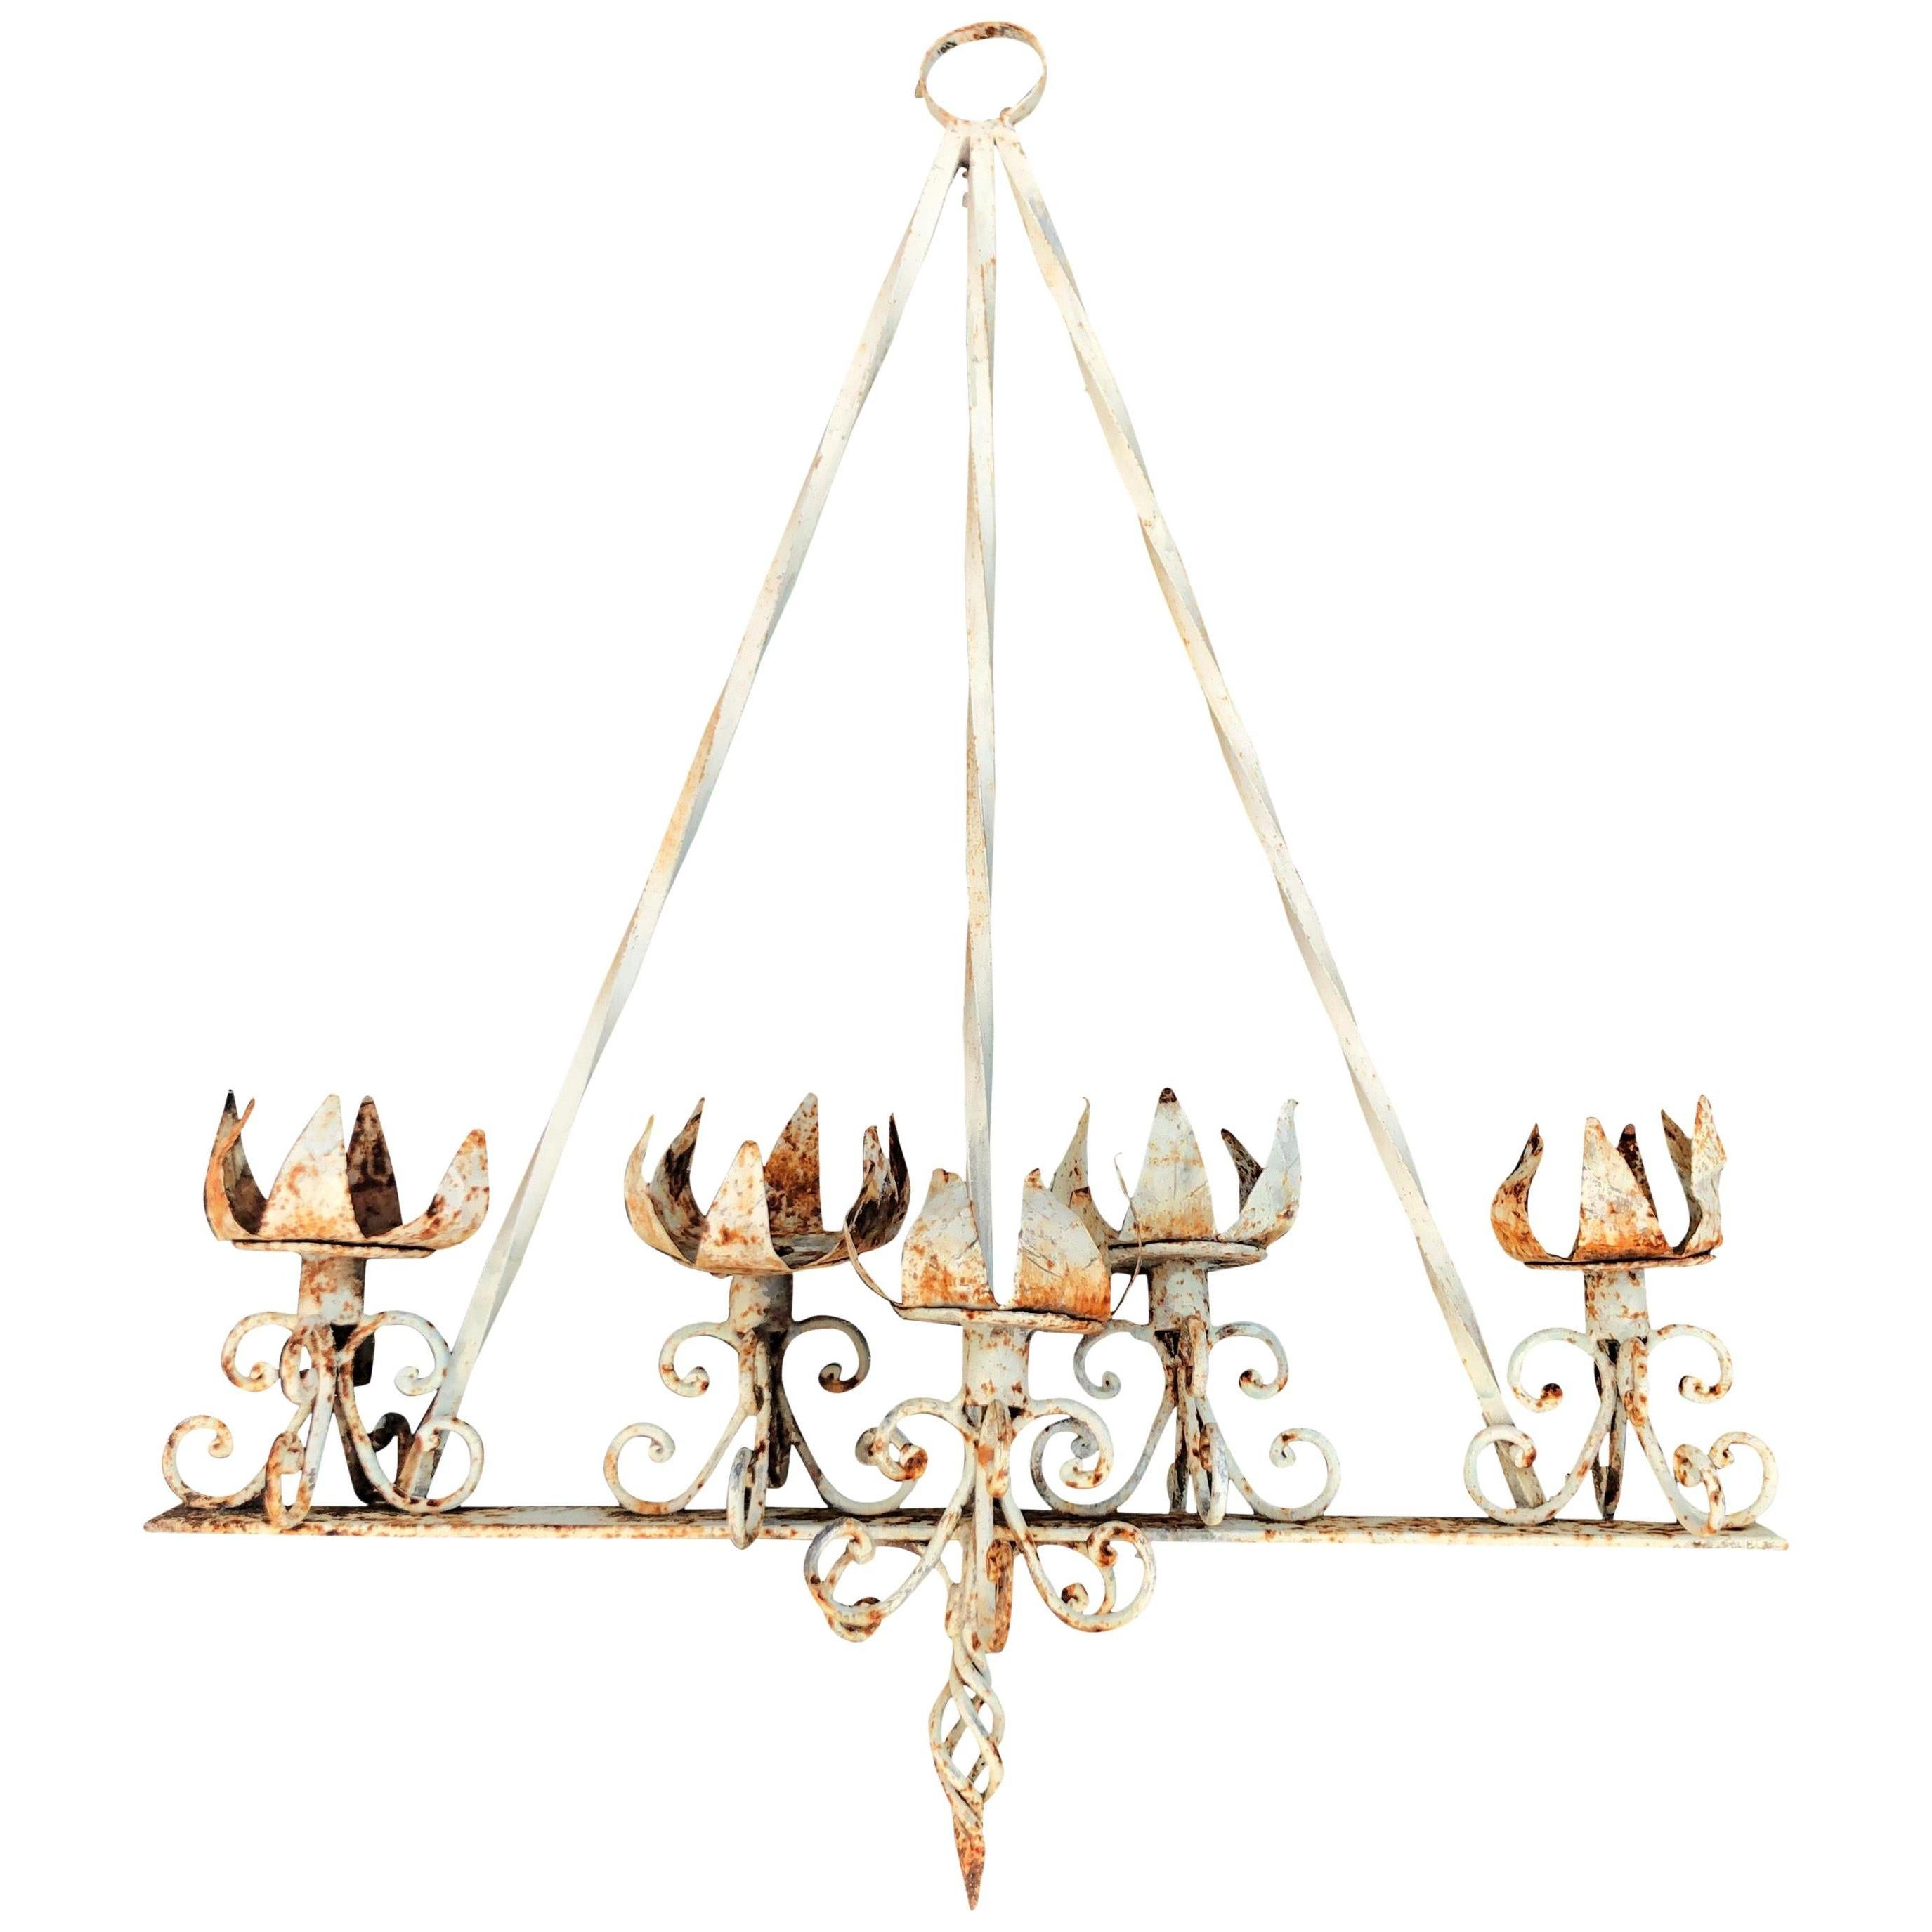 Medieval Style Iron Wall Candelabra For Sale